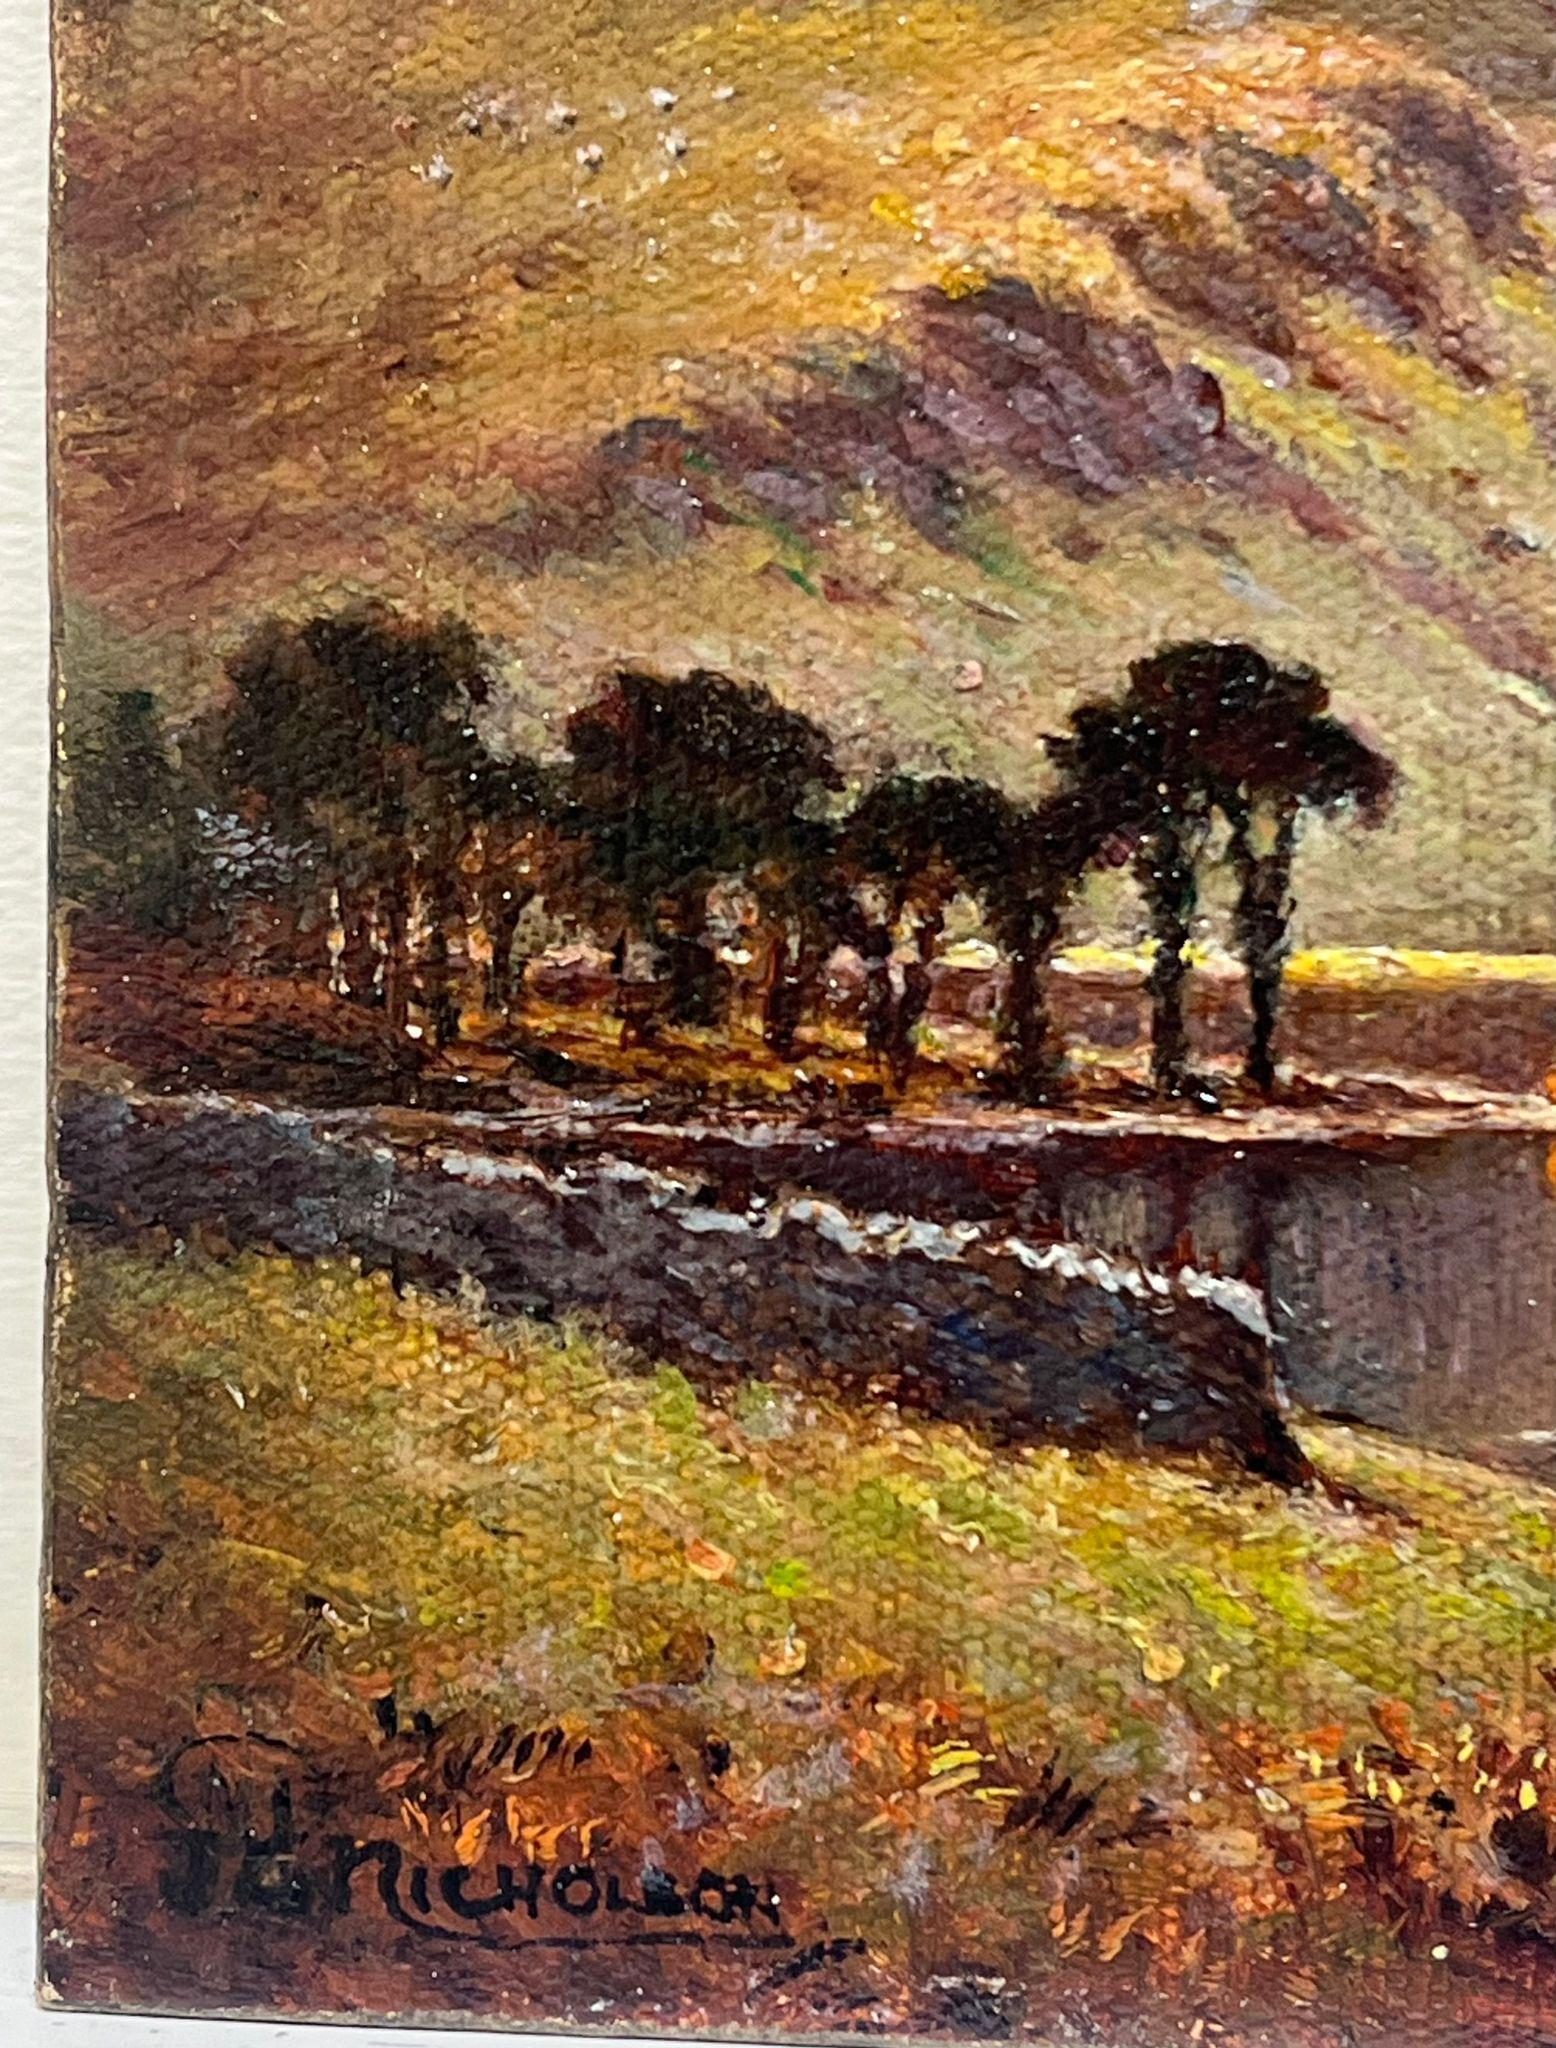 'High Crag & High Stile, Buttermere'
British School, early 20th century
signed lower corner
oil on board, unframed
board: 7 x 10 inches
provenance: private collection, UK
condition: very good and sound condition

High Crag is one of the fells in the